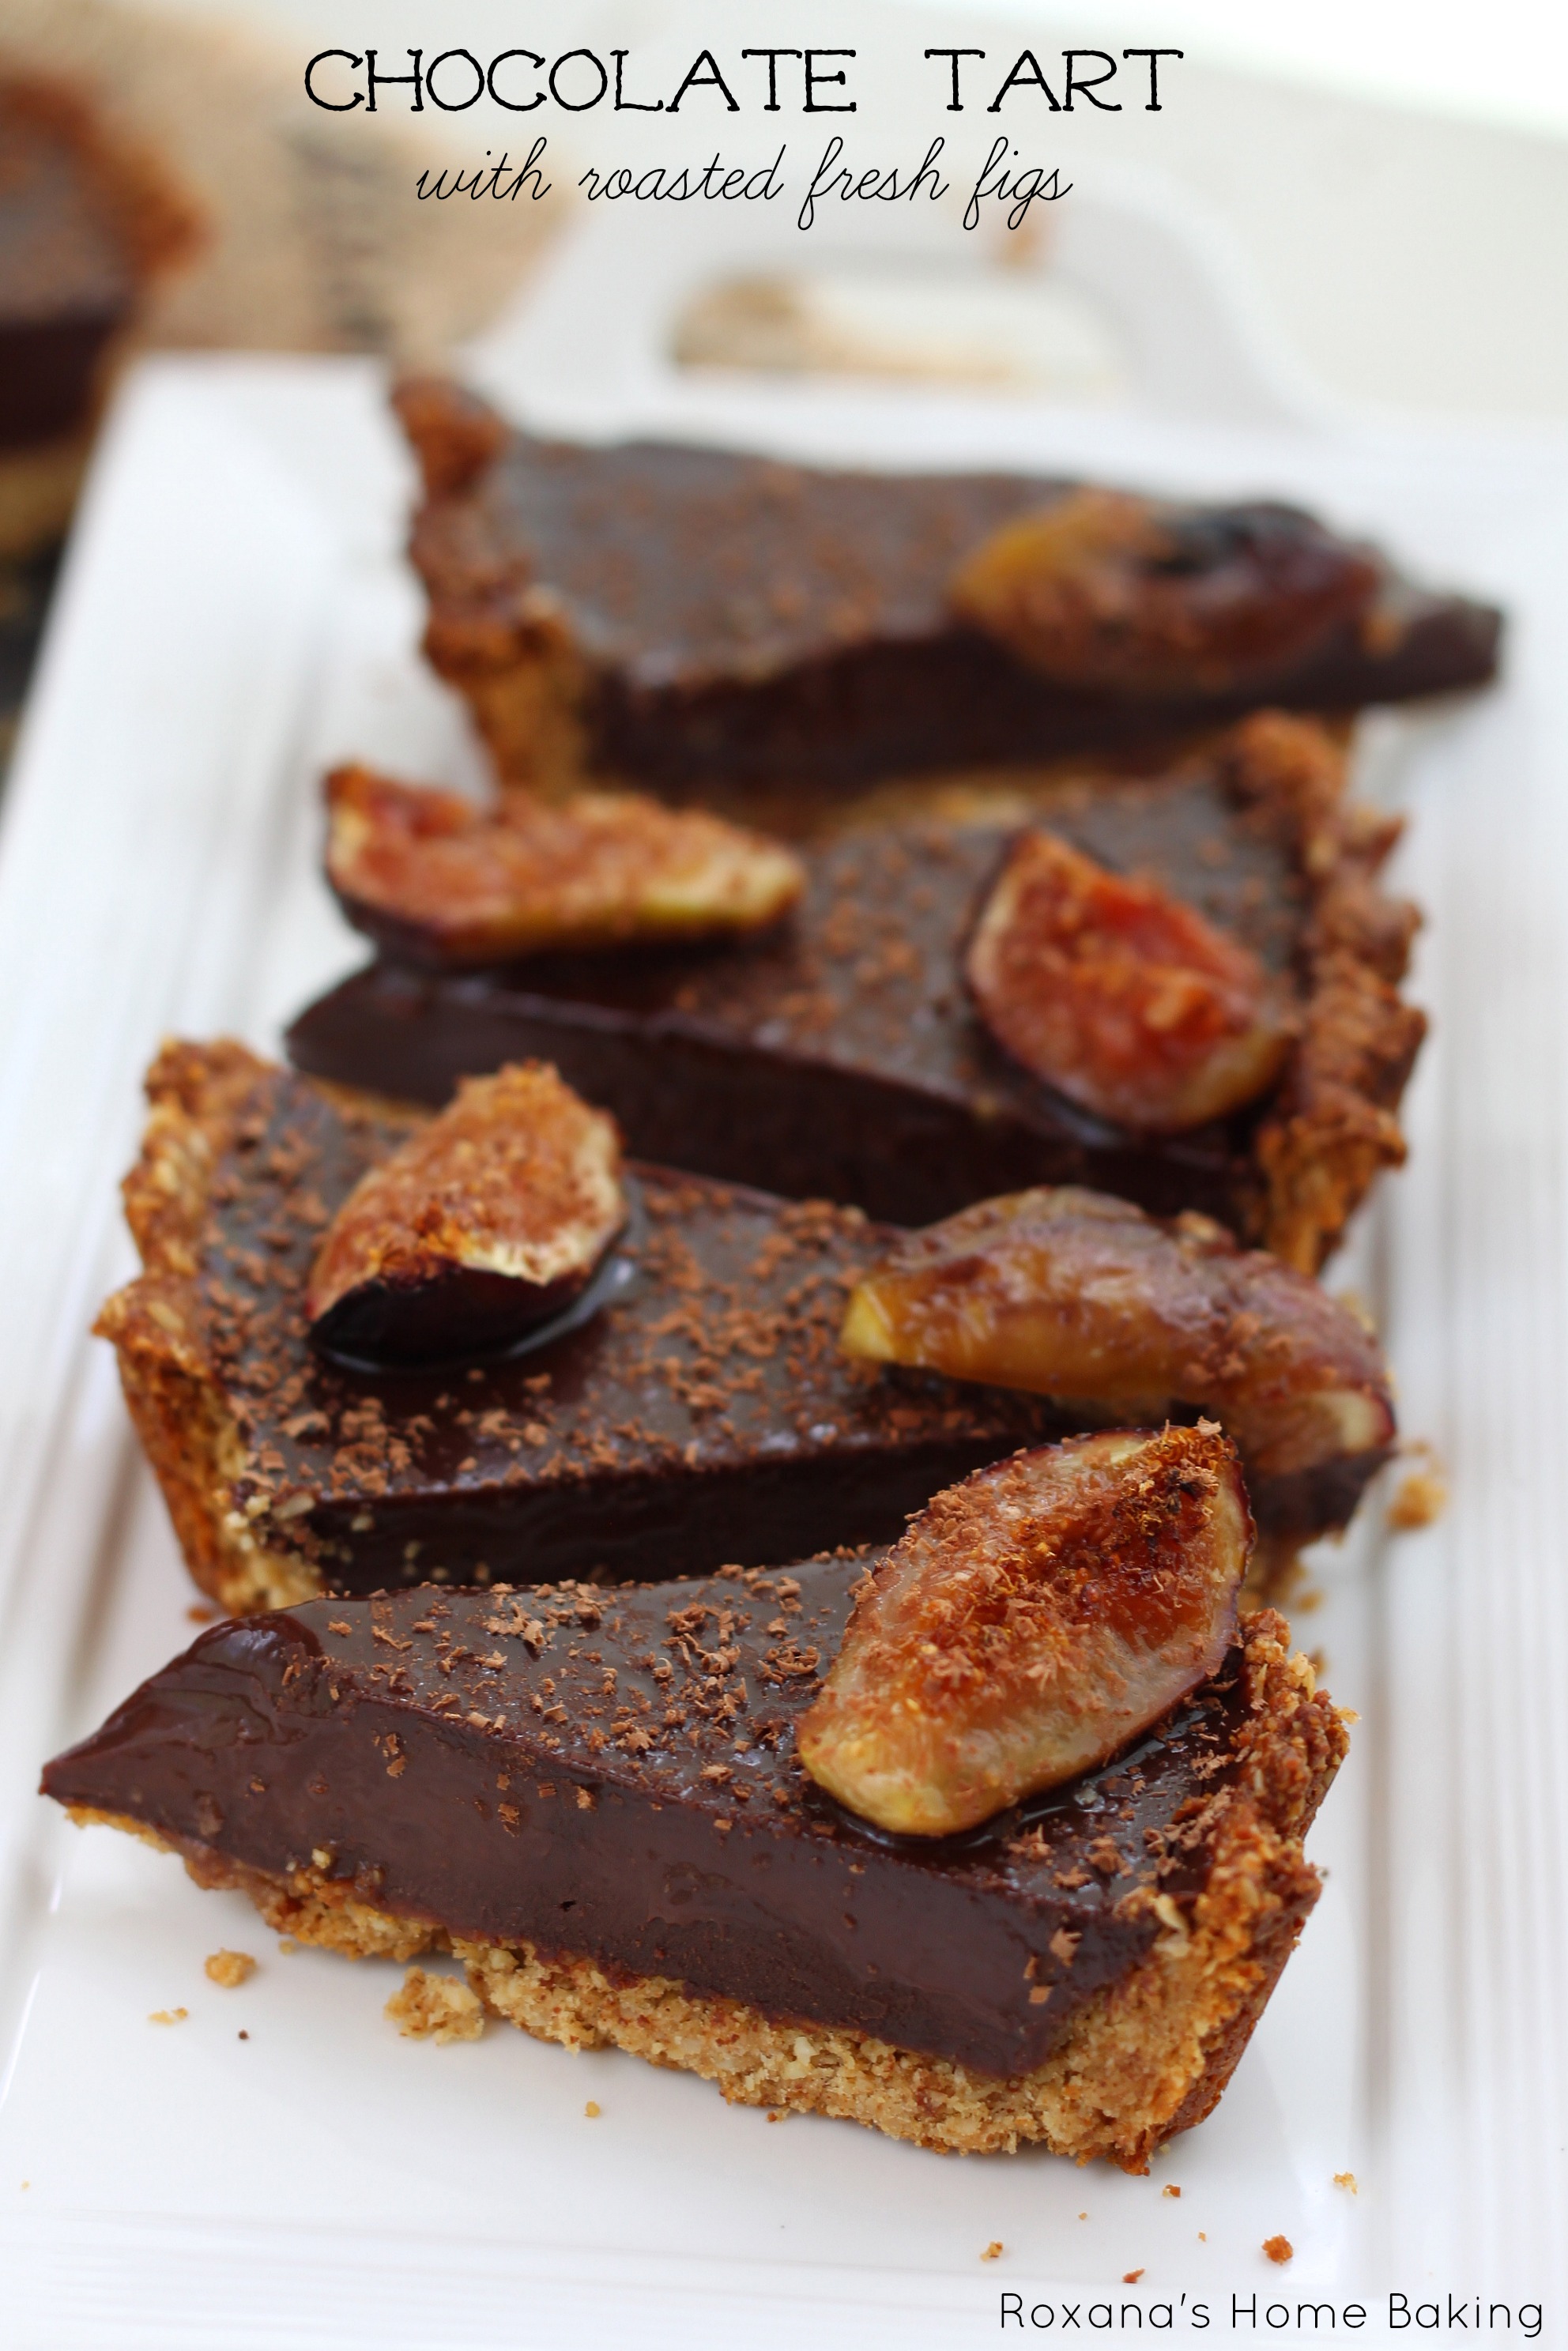 Decadent, rich chocolate ganache filling, a nutty crust and juicy sweet fresh figs make this roasted figs chocolate ganache tart a treat for a special occasion. Recipe from Roxanashomebaking.com